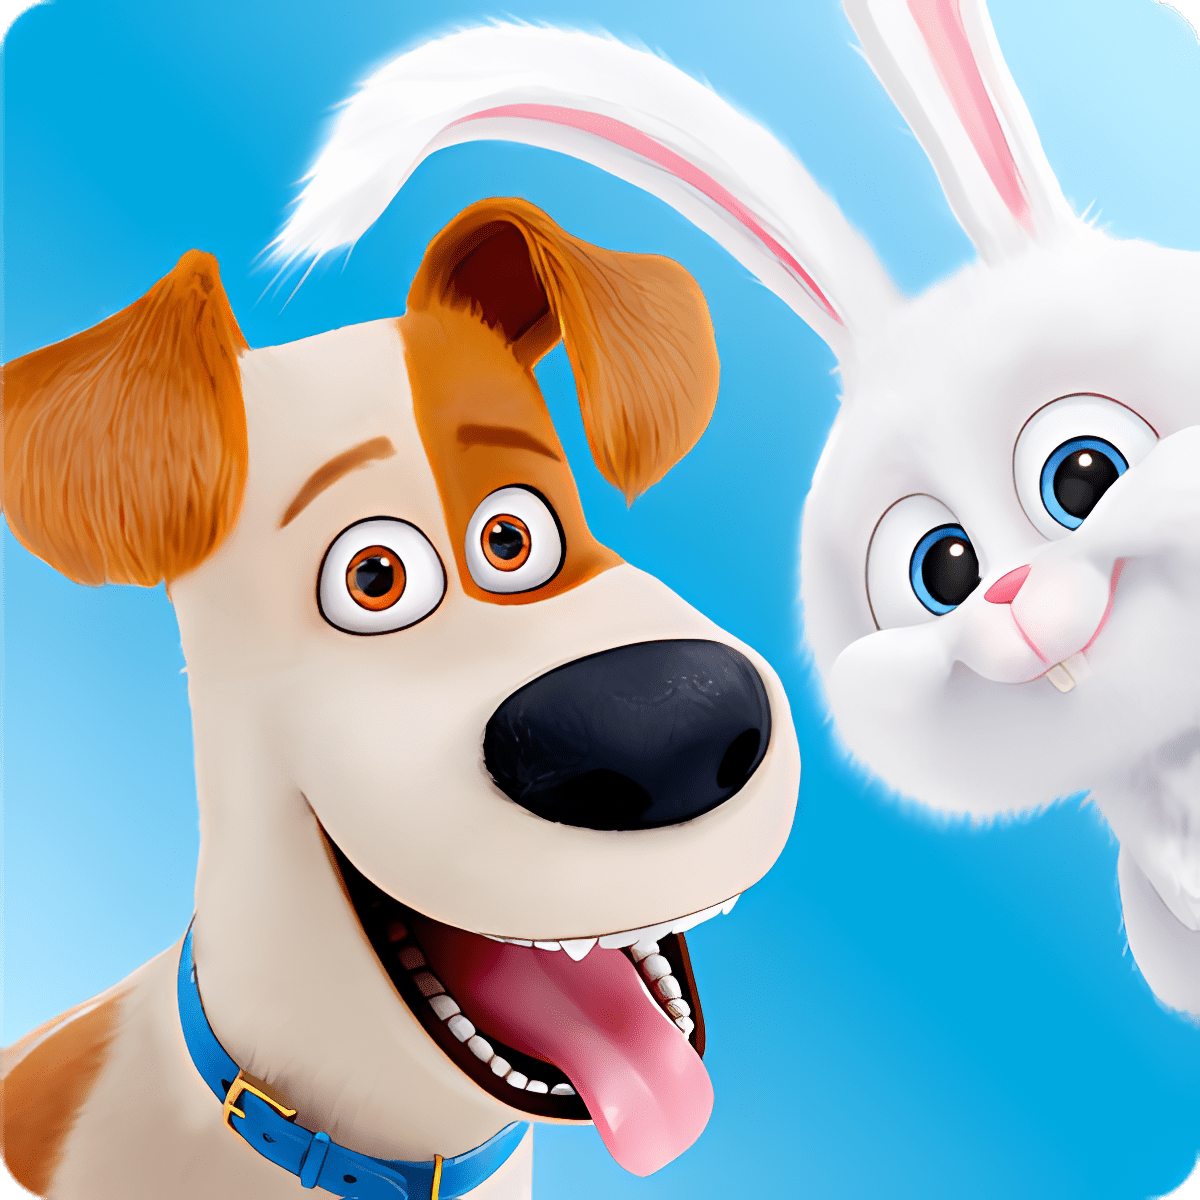 download The Secret Life of Pets free